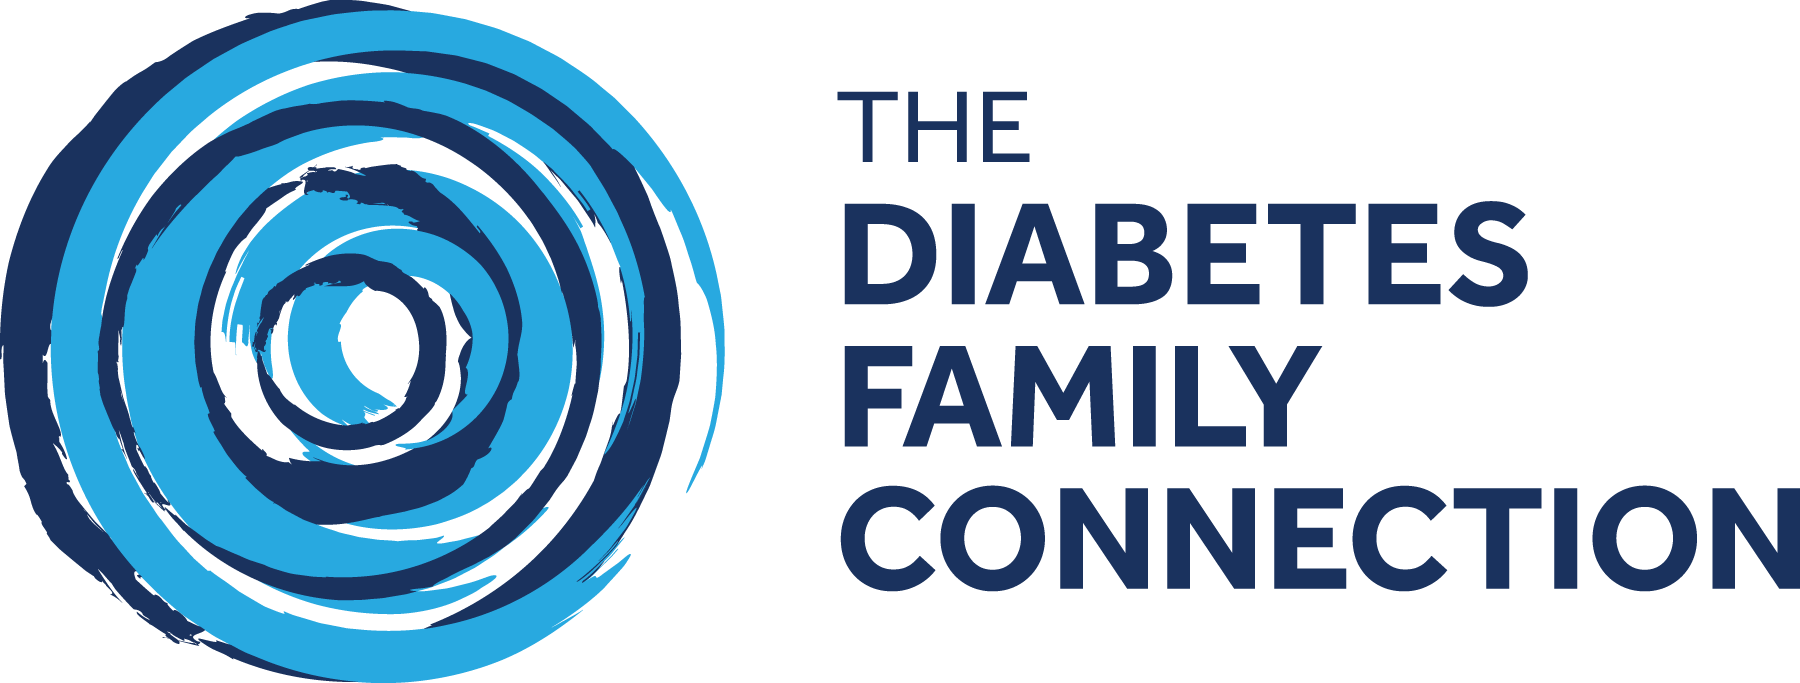 The Diabetes Family Connection